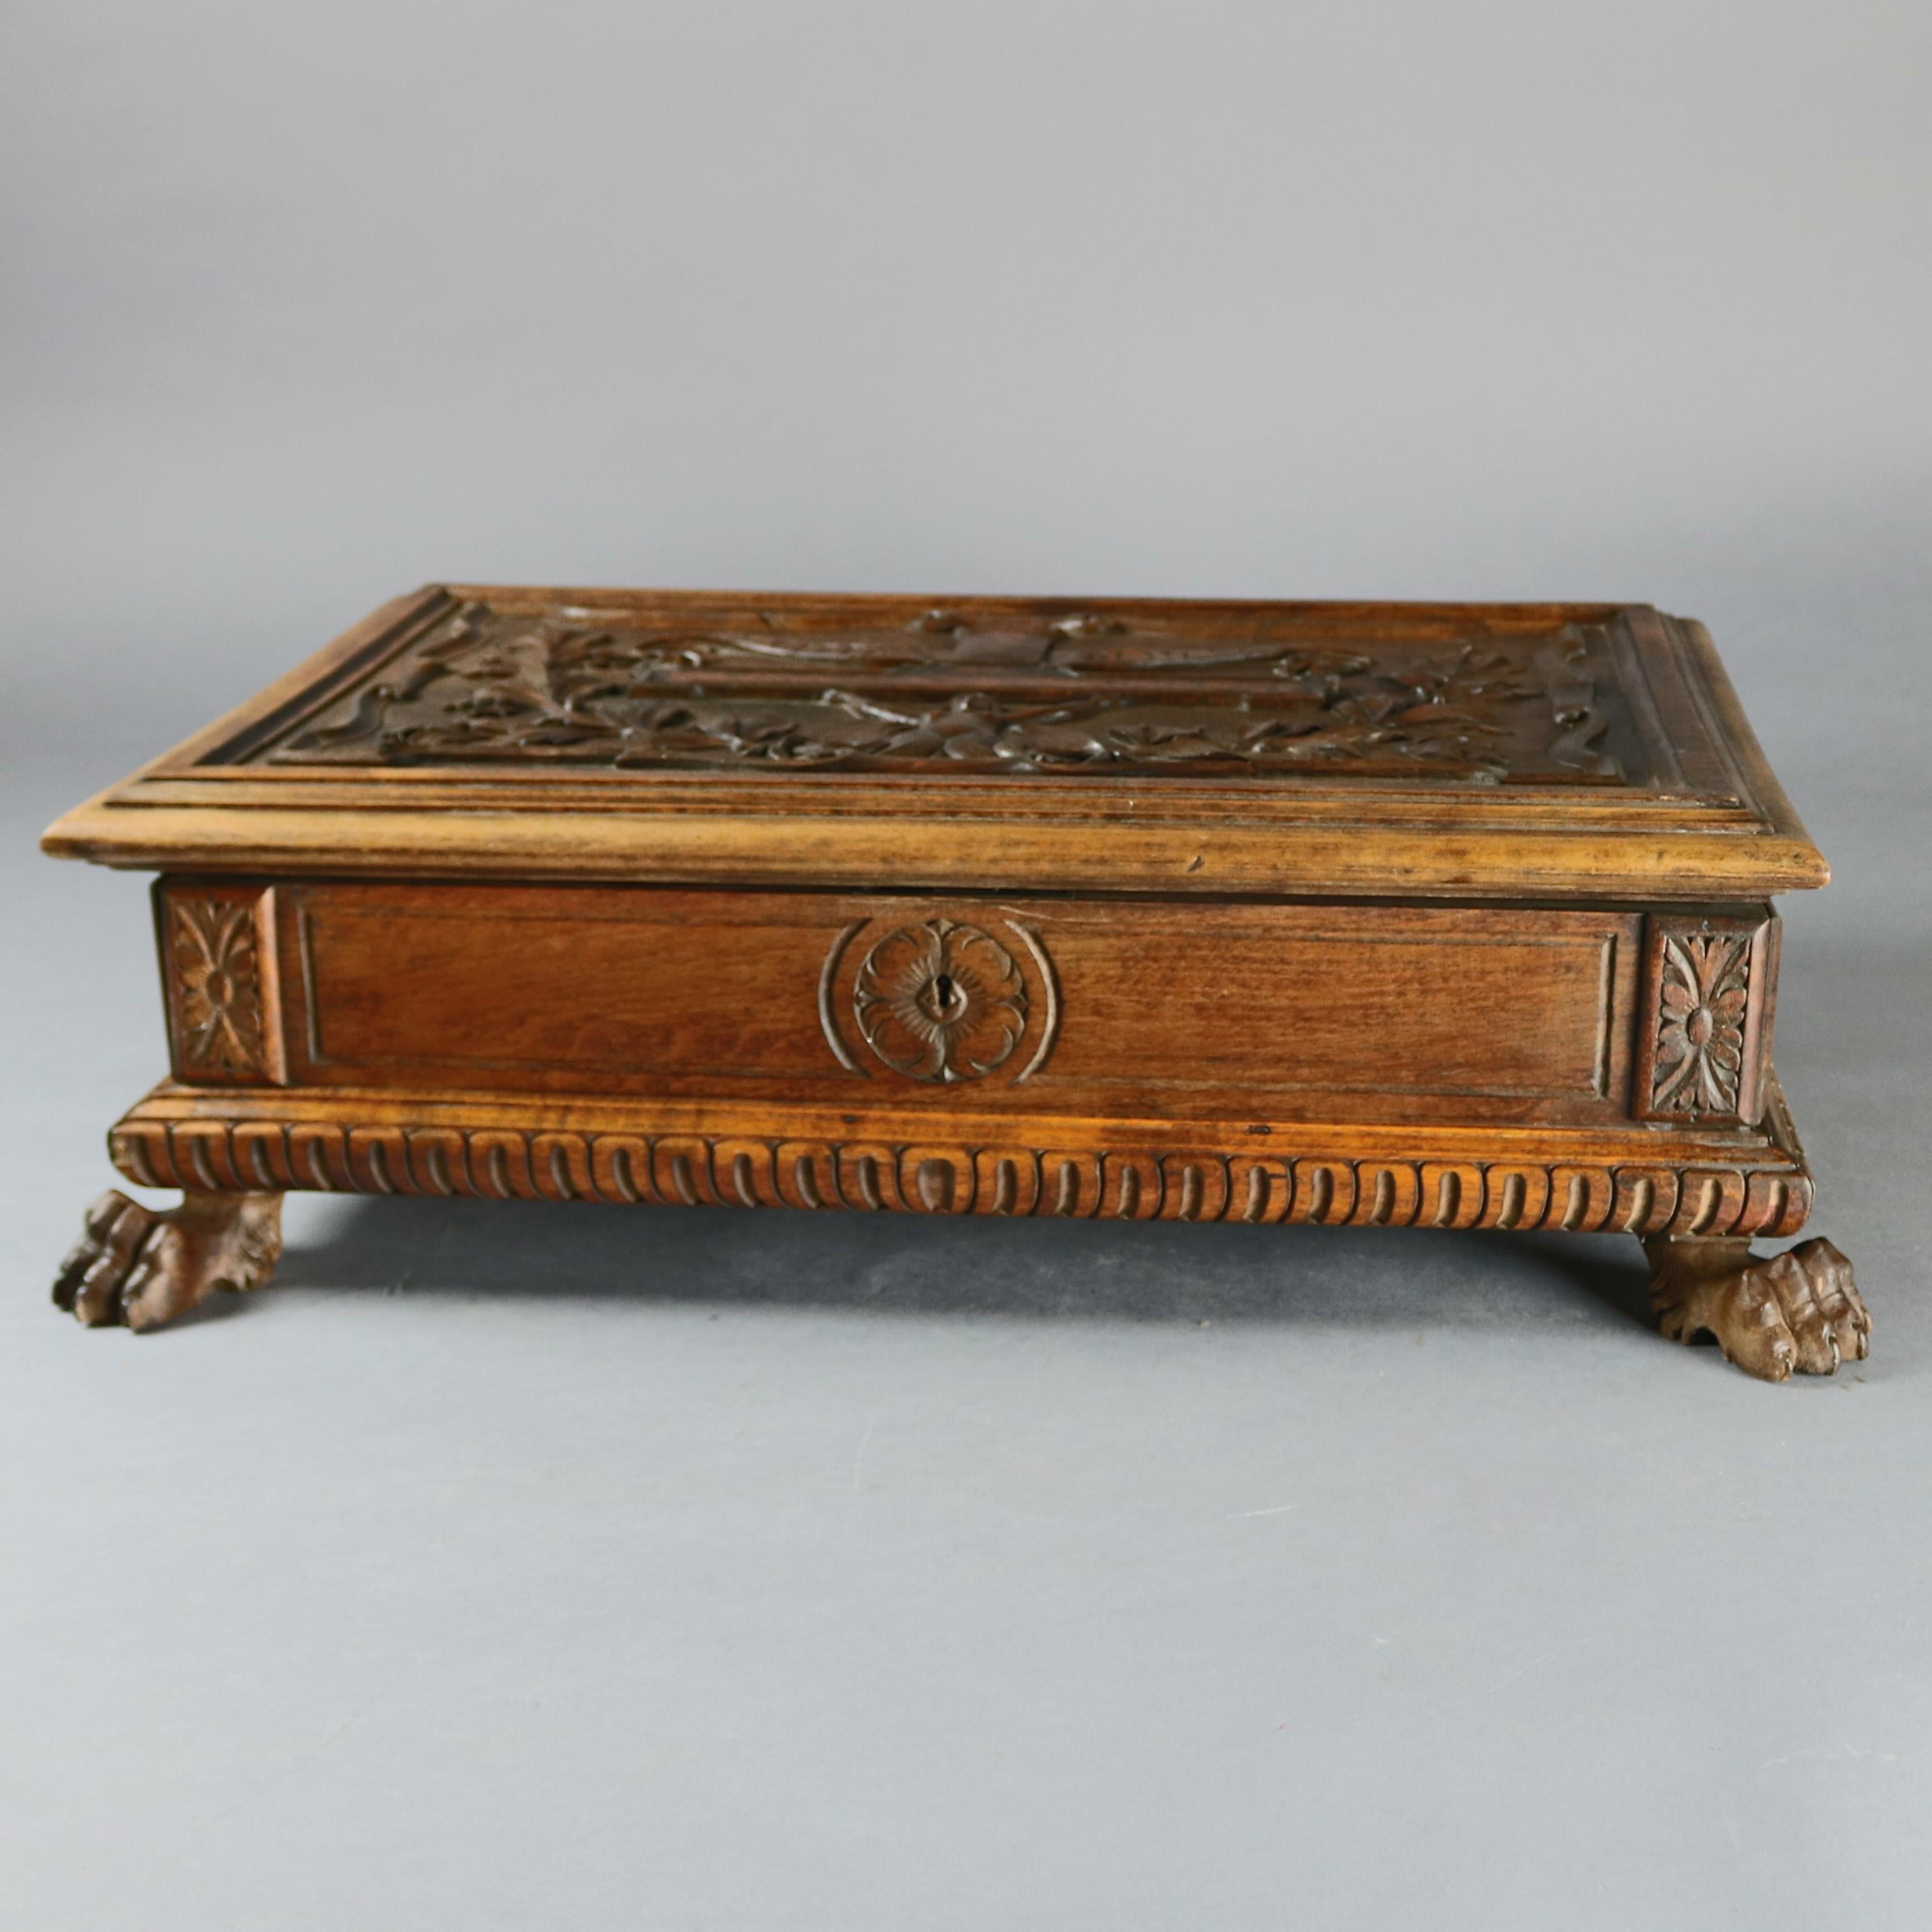 An antique figural bible box offers heavily carved walnut construction having top with 